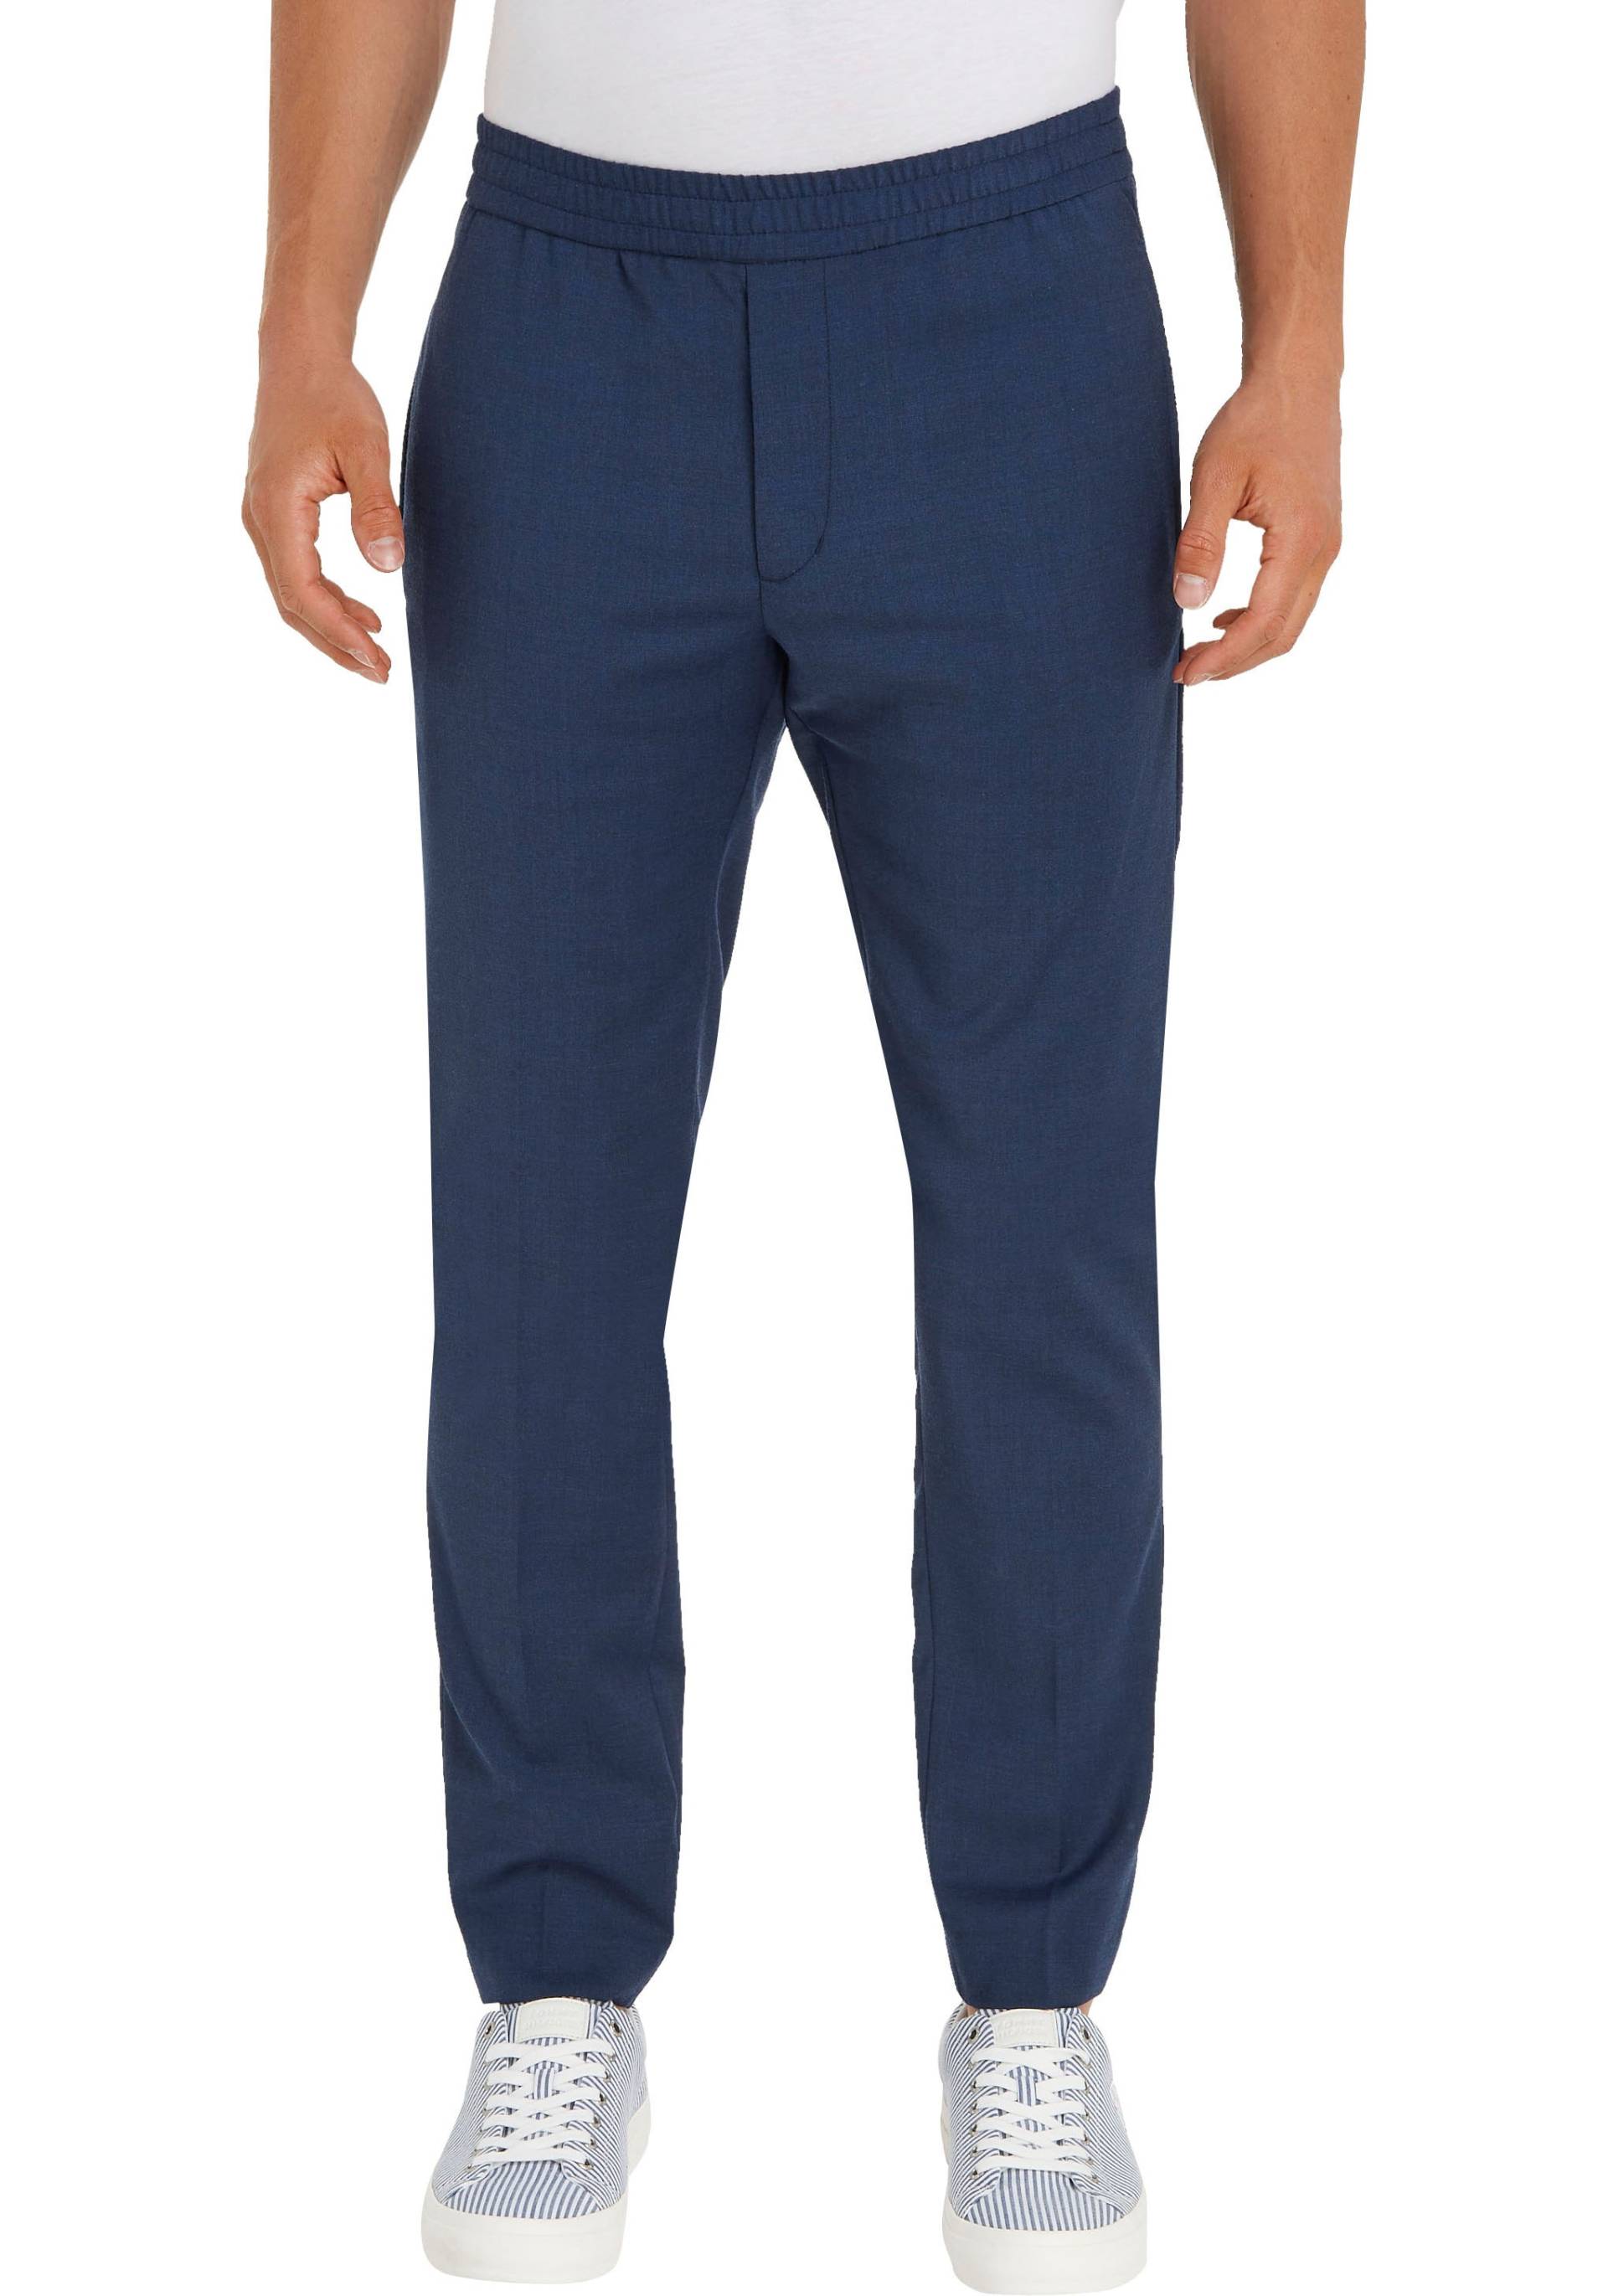 Tommy Hilfiger TAILORED Stoffhose »HAMPTON TRAVEL TROPICAL PO«, mit dezentem Detail in den Tommy Hilfiger Logofarben an der Tasche von TOMMY HILFIGER Tailored